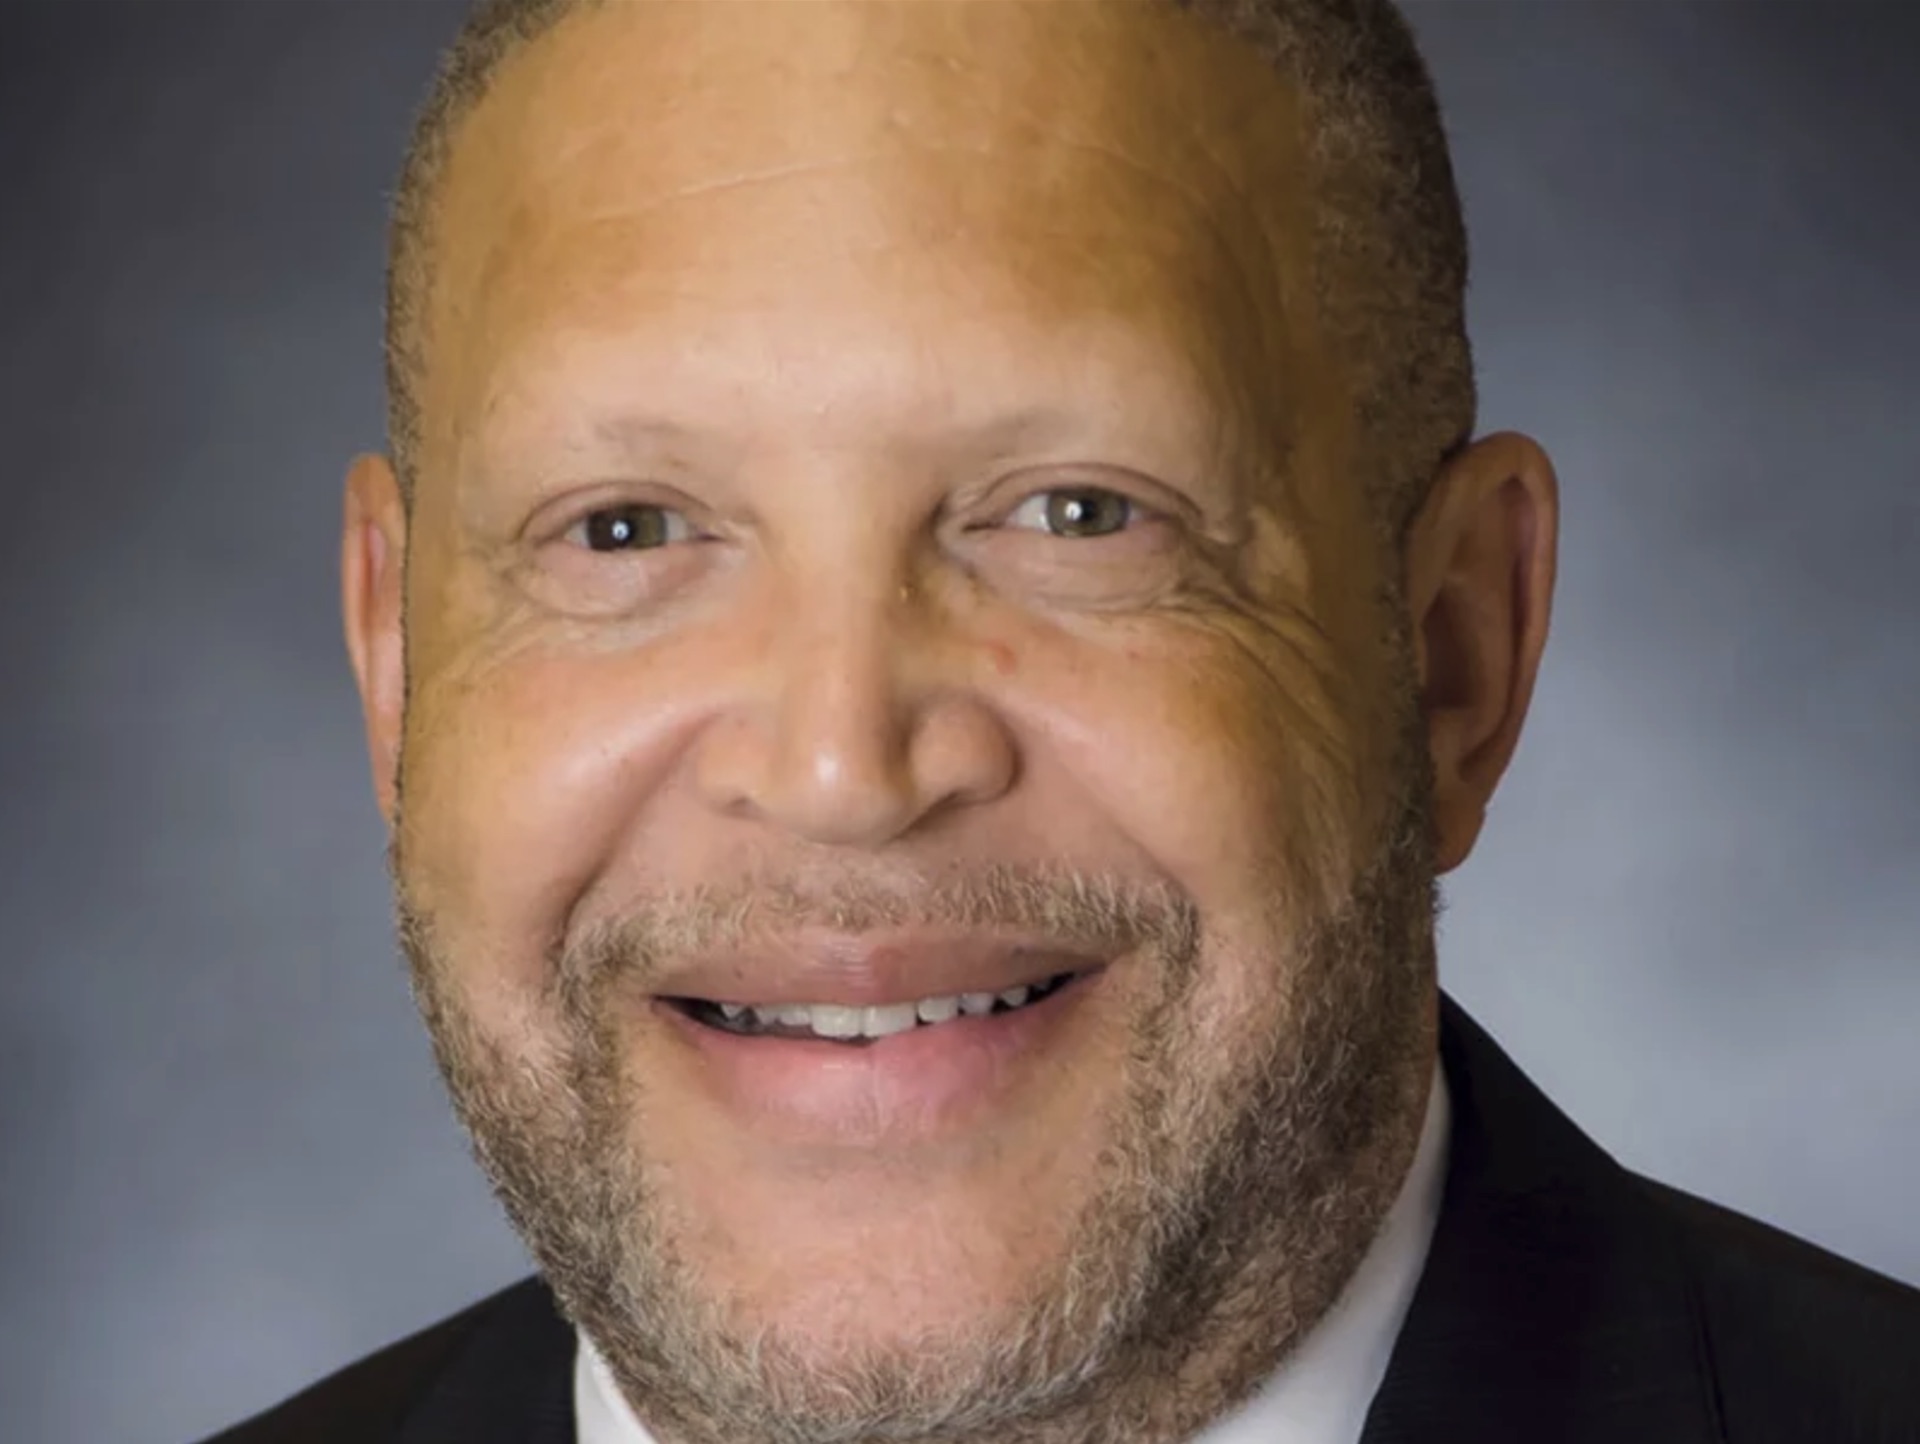 Kaiser Permanente Names Gregory Adams as New Chairman and CEO